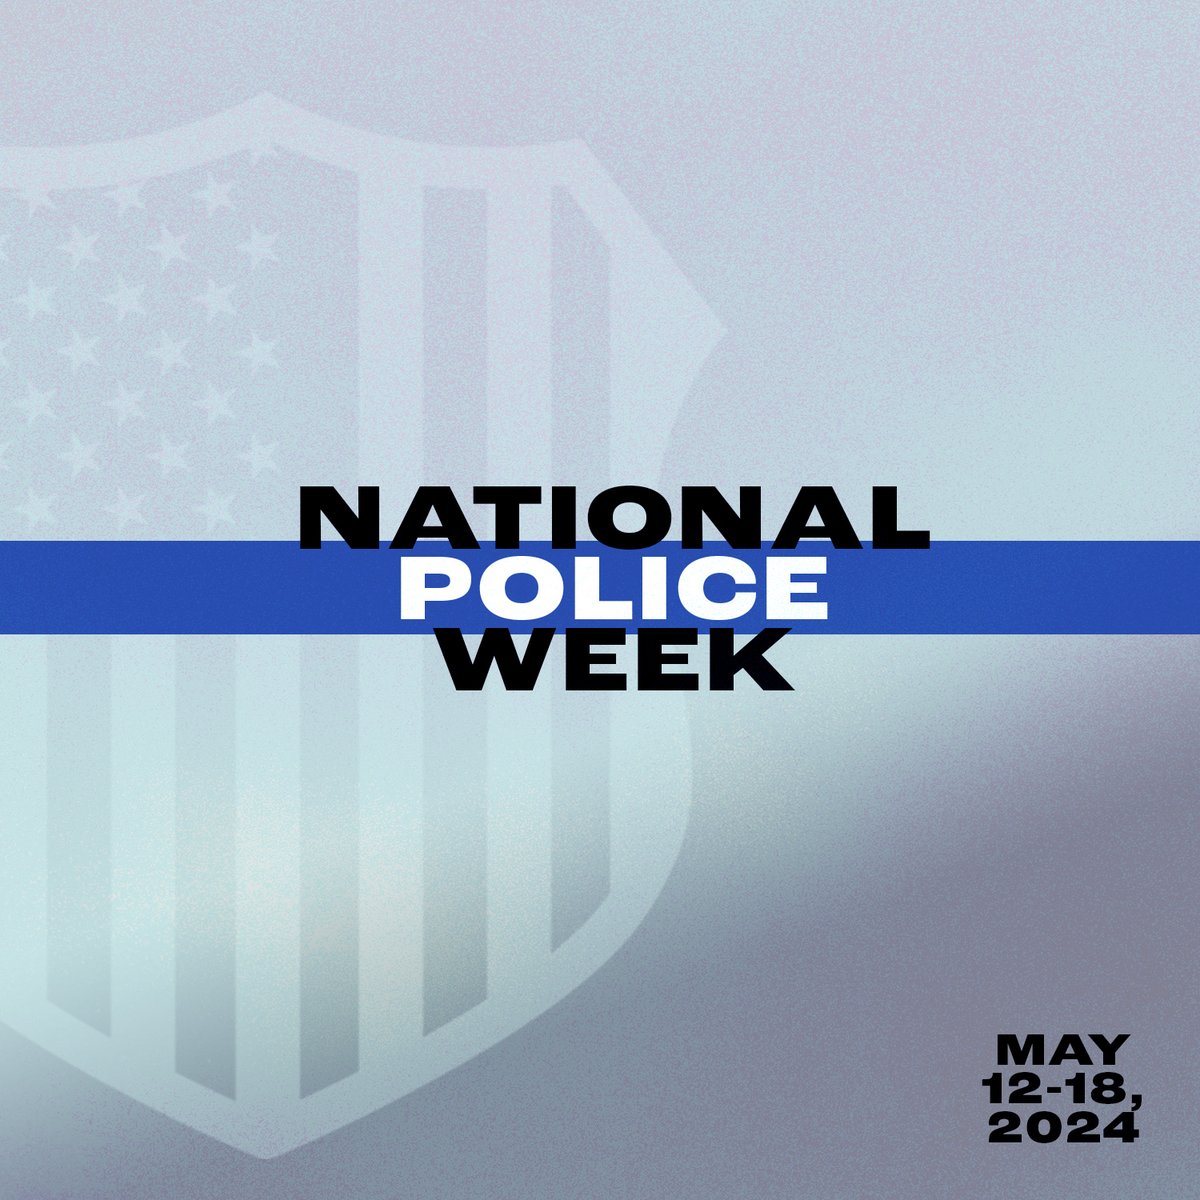 During #NationalPoliceWeek, we recognize and honor our brave police officers across the nation who run toward danger and put their lives on the line every shift to keep us safe. Thank you for your heroic work and dedication!